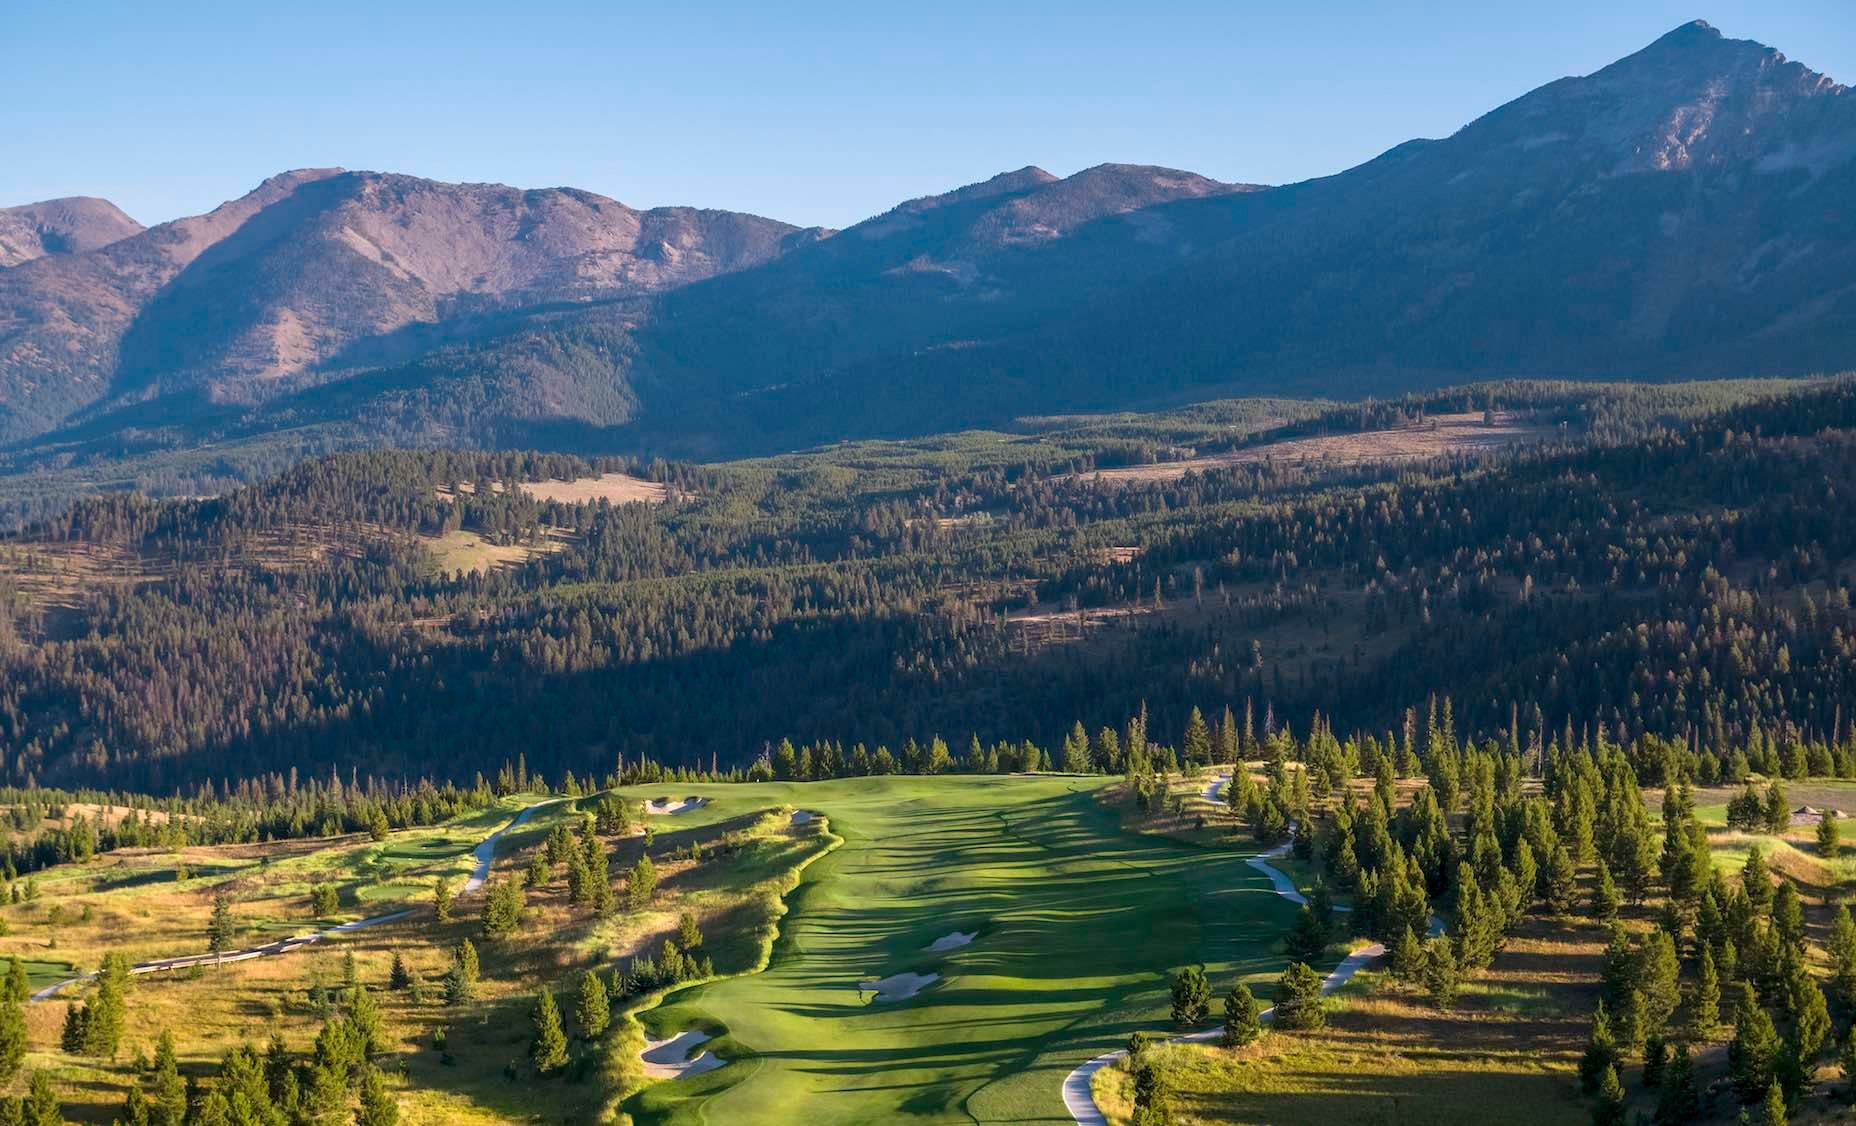 Moonlight Basin PHOTOS: 'The Match' host course is absolutely stunning